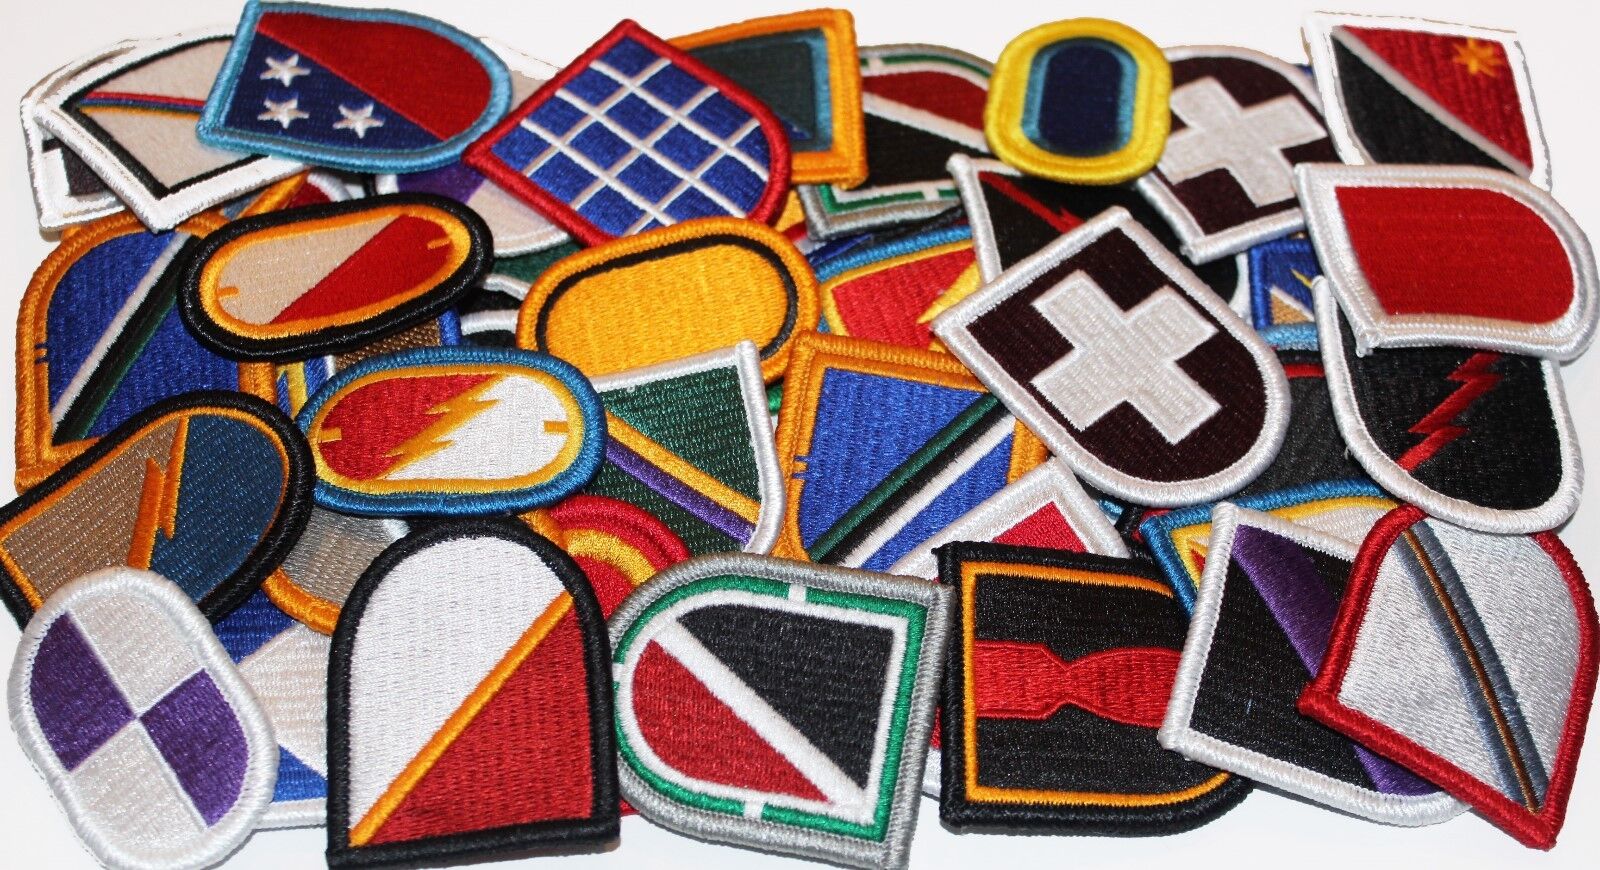 Mixed Lot of 50 Army Insignia Beret Multicolor Flash & Oval ABN Military Patches